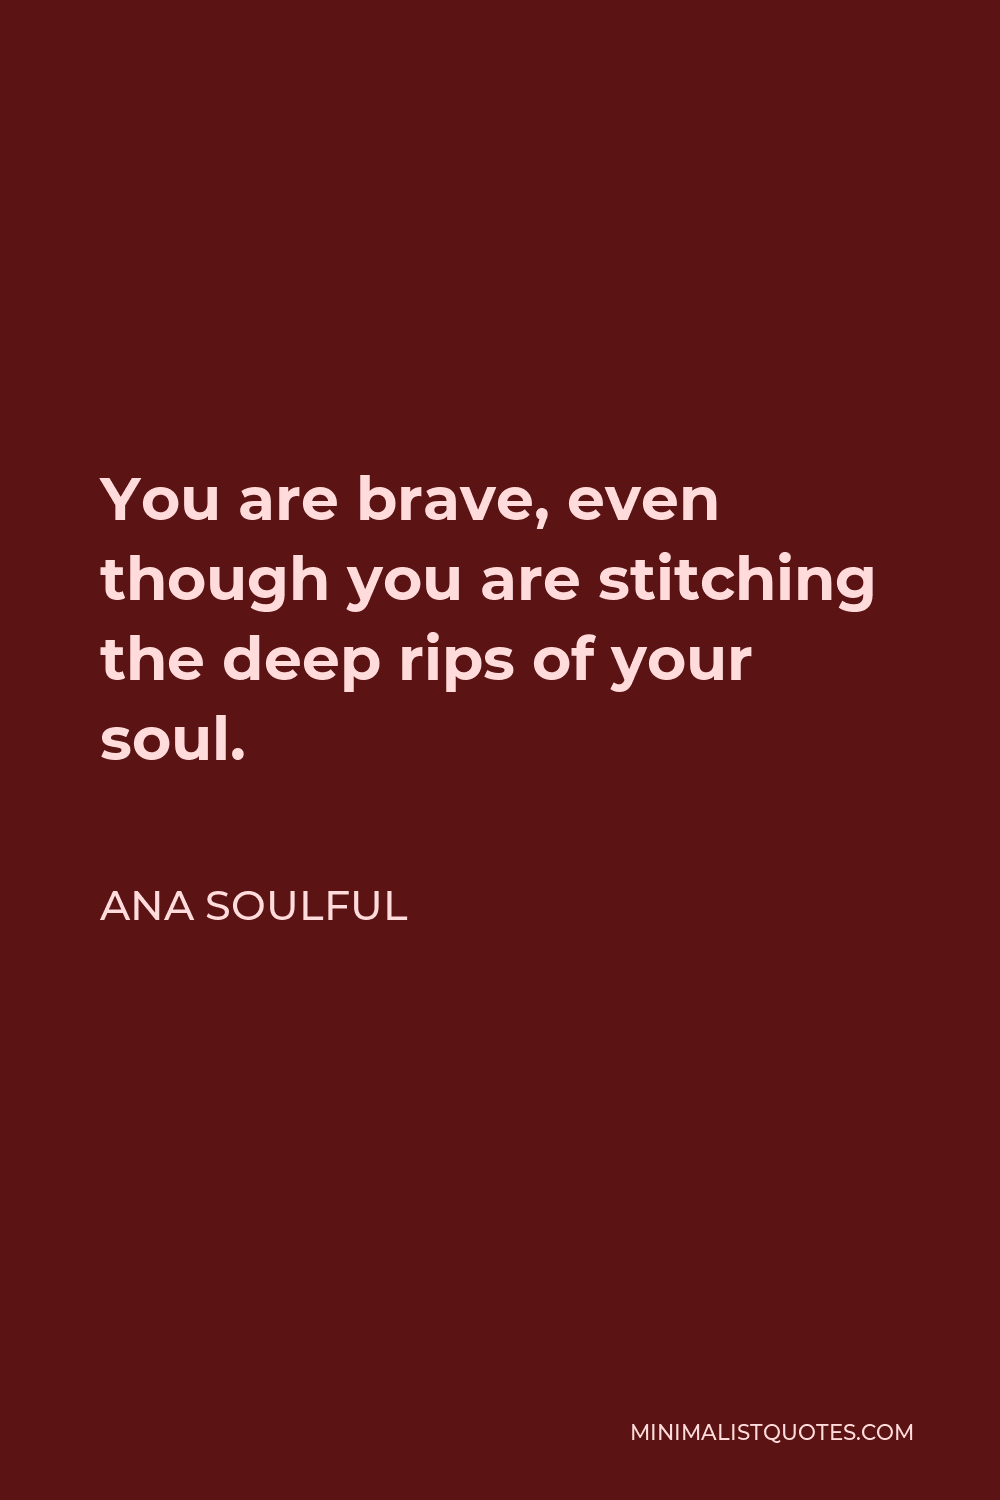 Ana Soulful Quote - You are brave, even though you are stitching the deep rips of your soul.